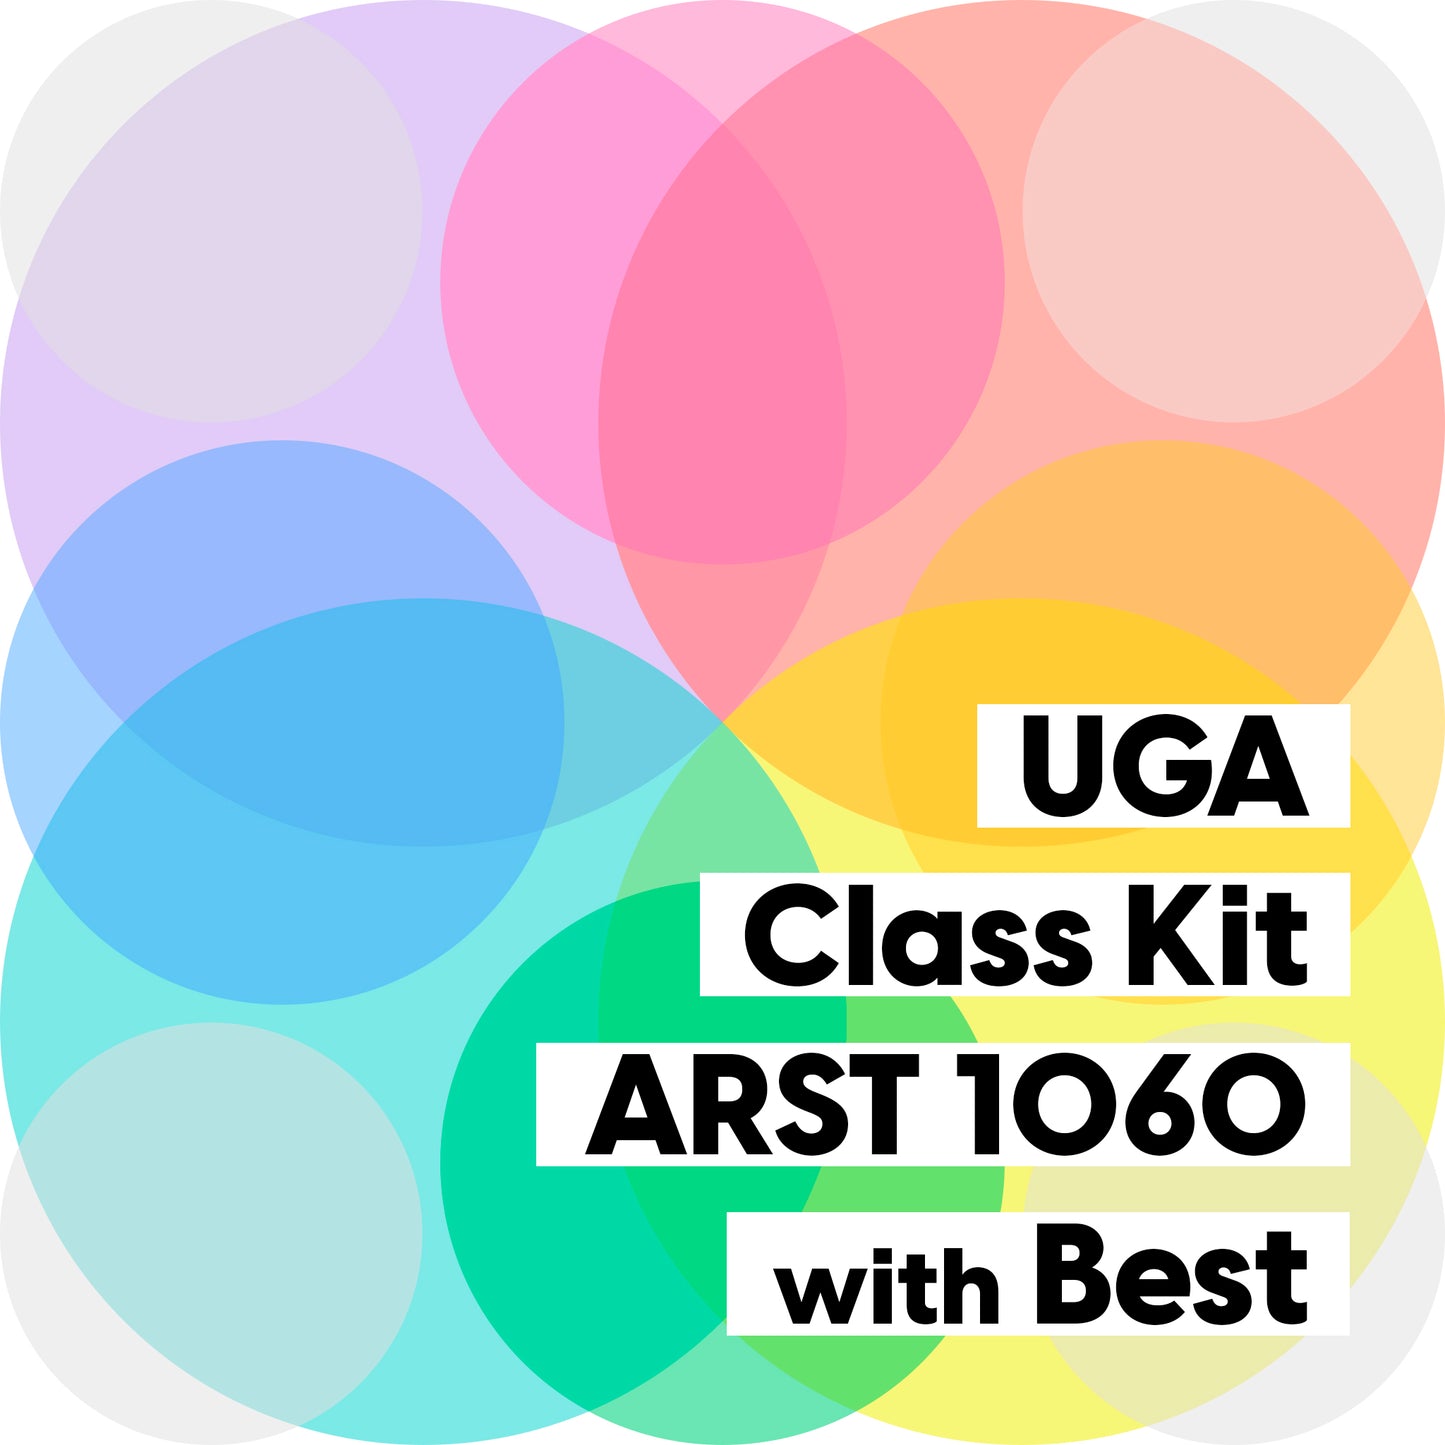 Kit #18 • Class Kit for UGA - ARST 1060 with Best • Fall 2023